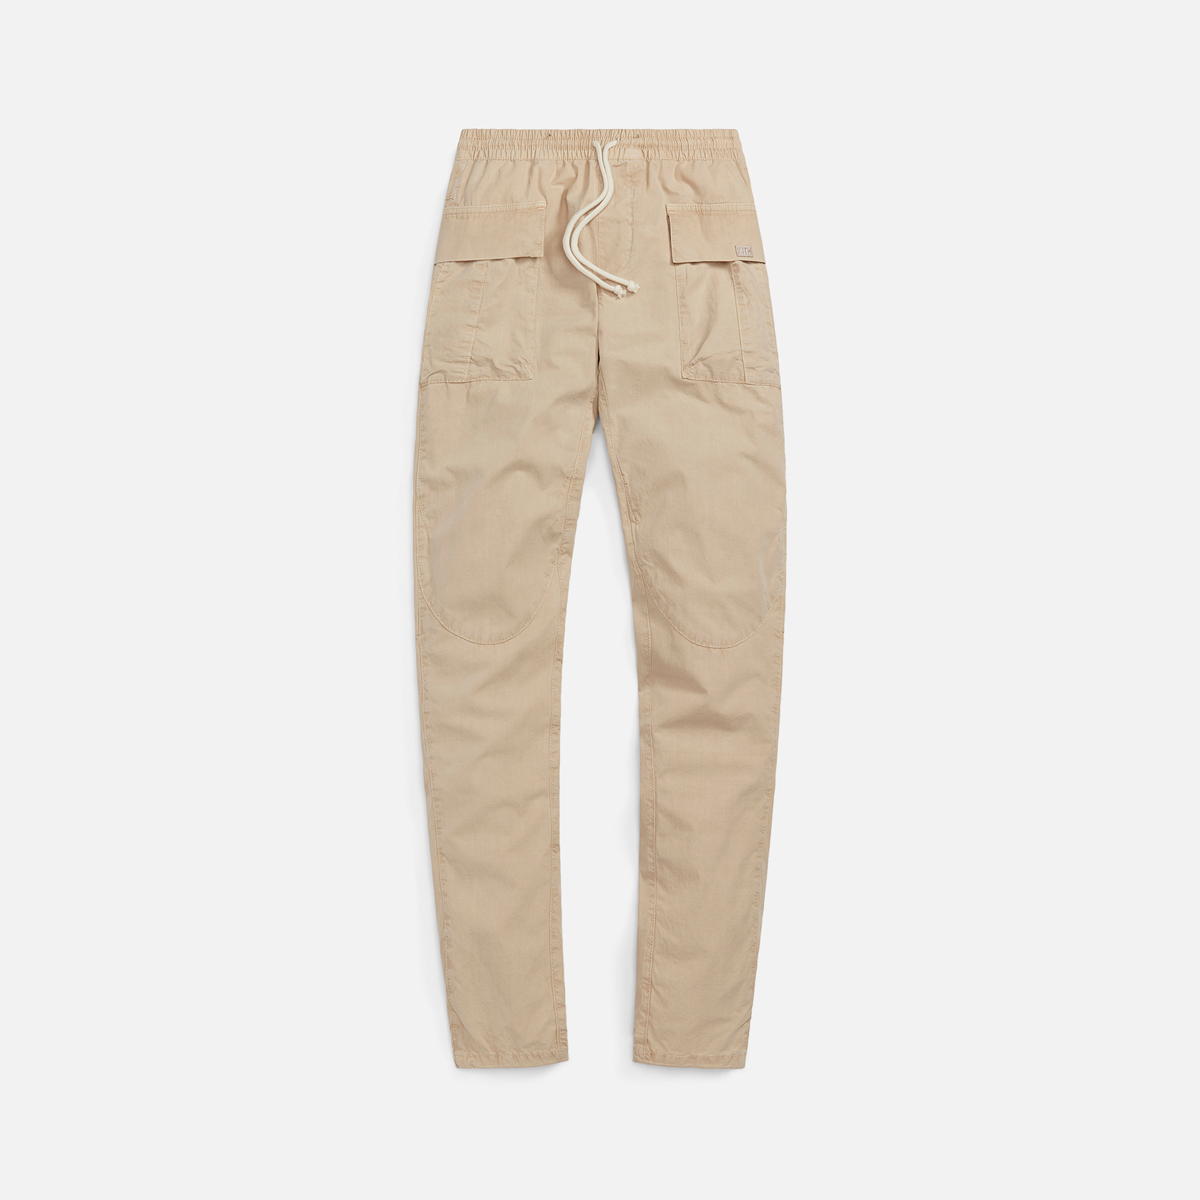 kith-fall-winter-2021-collection-bottoms-23